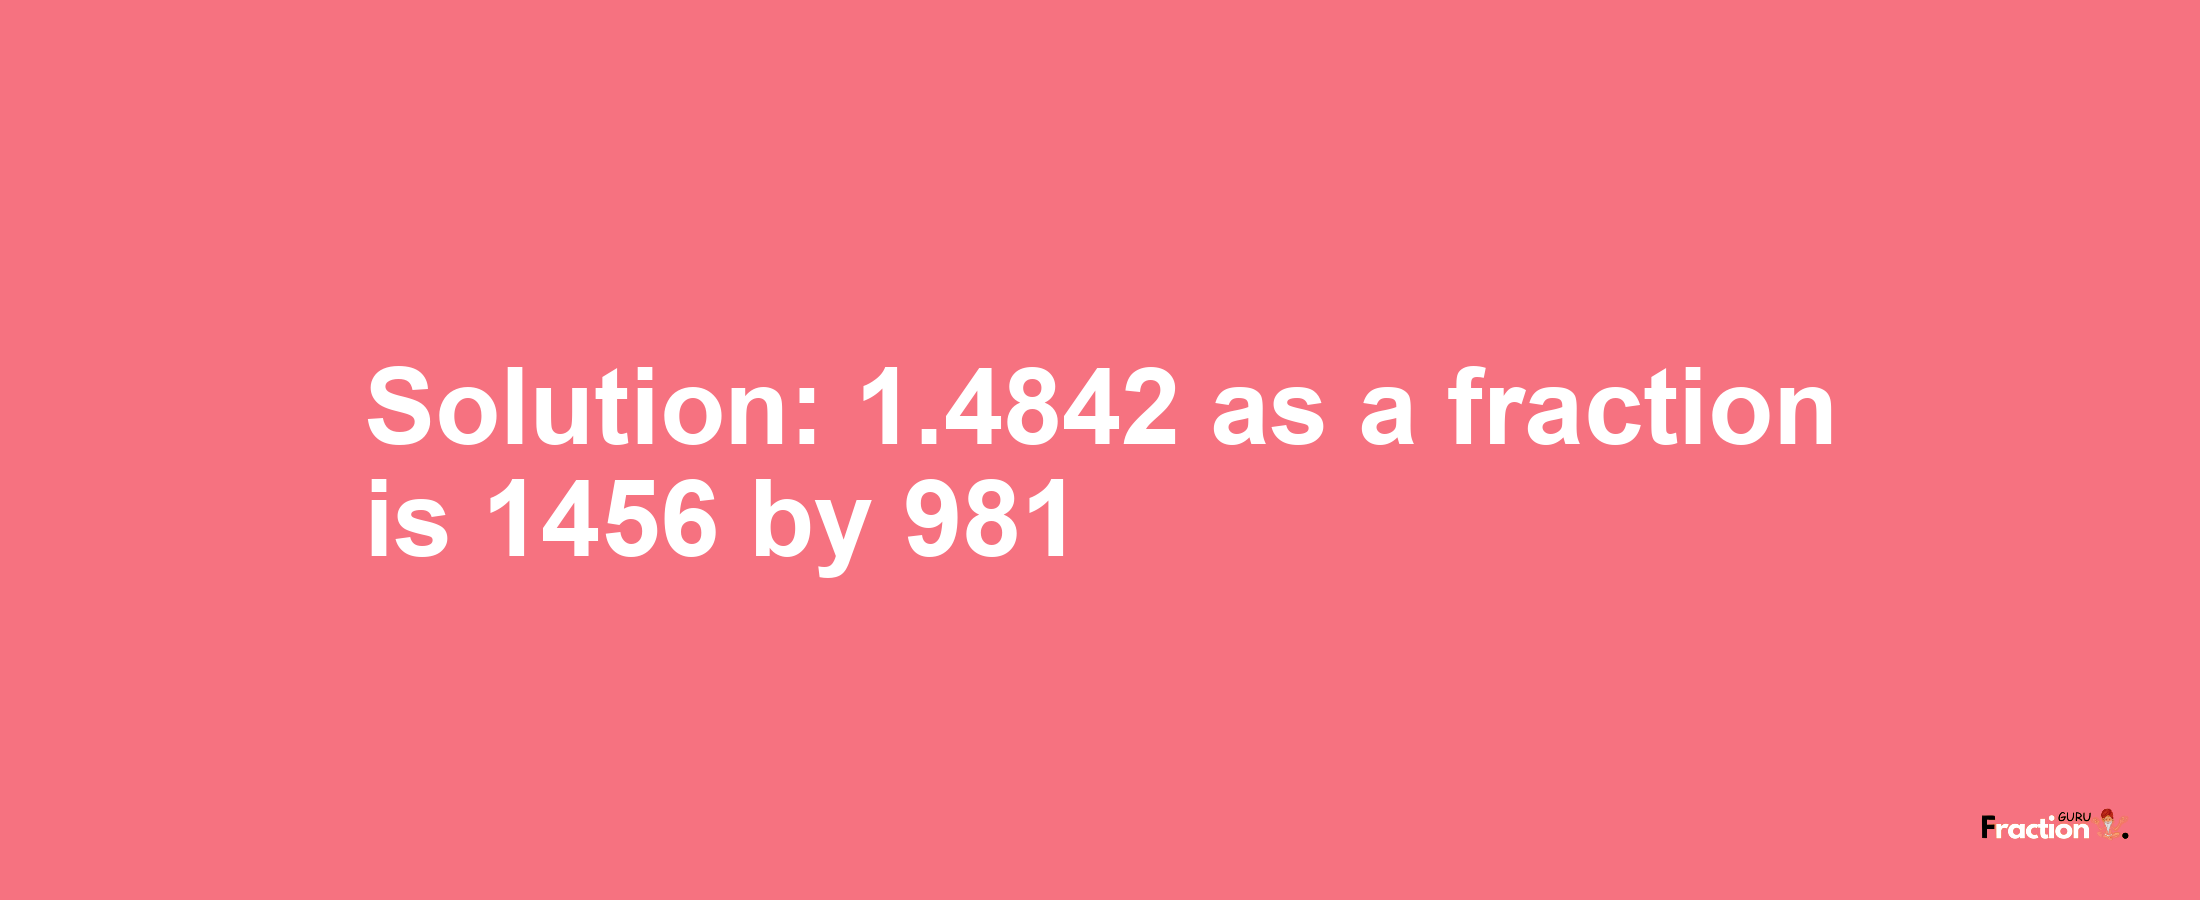 Solution:1.4842 as a fraction is 1456/981